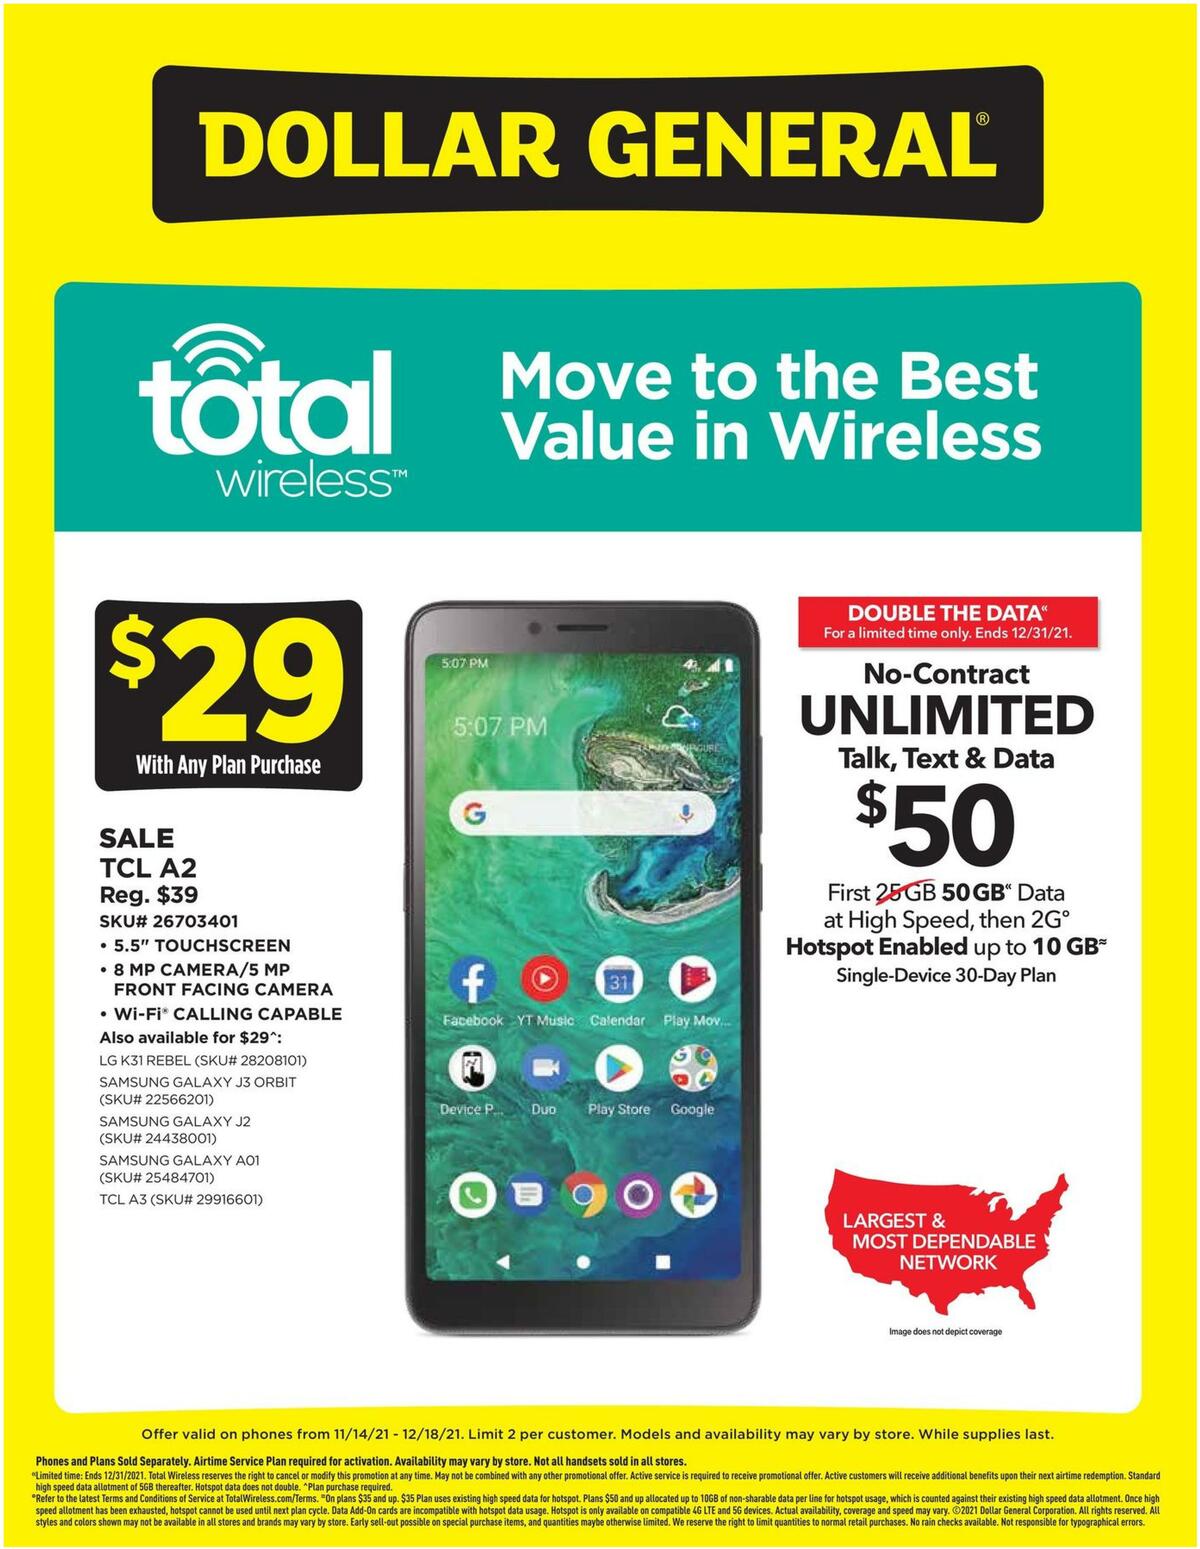 Dollar General Weekly Wireless Specials Weekly Ad from November 14